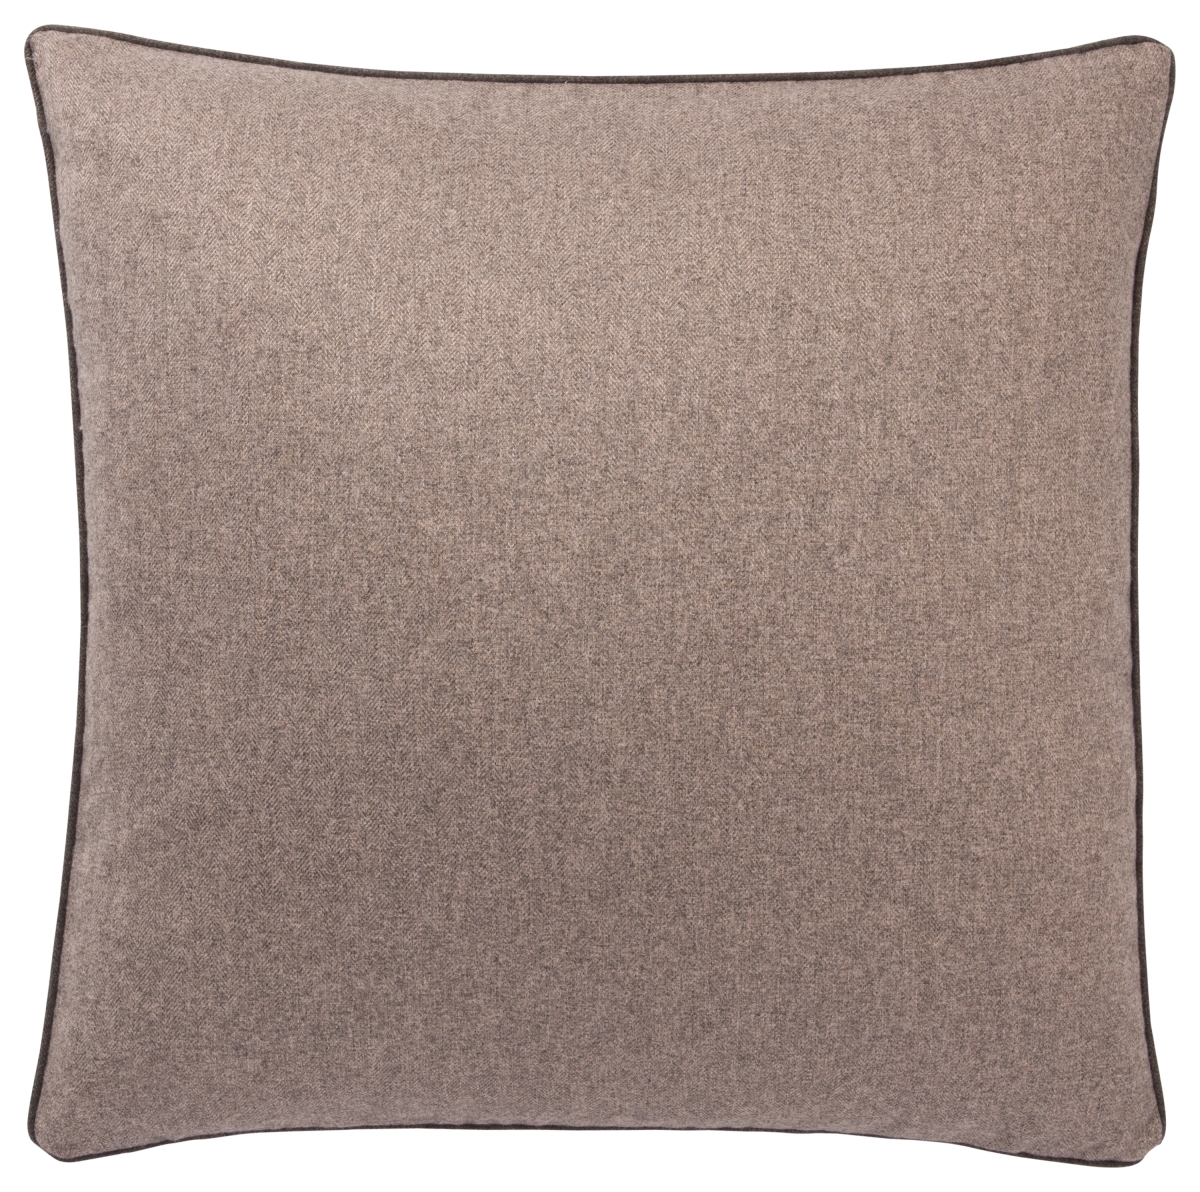 Plw103271 22 X 22 In. Pilcro Rollins Solid Light Brown Down Throw Pillow